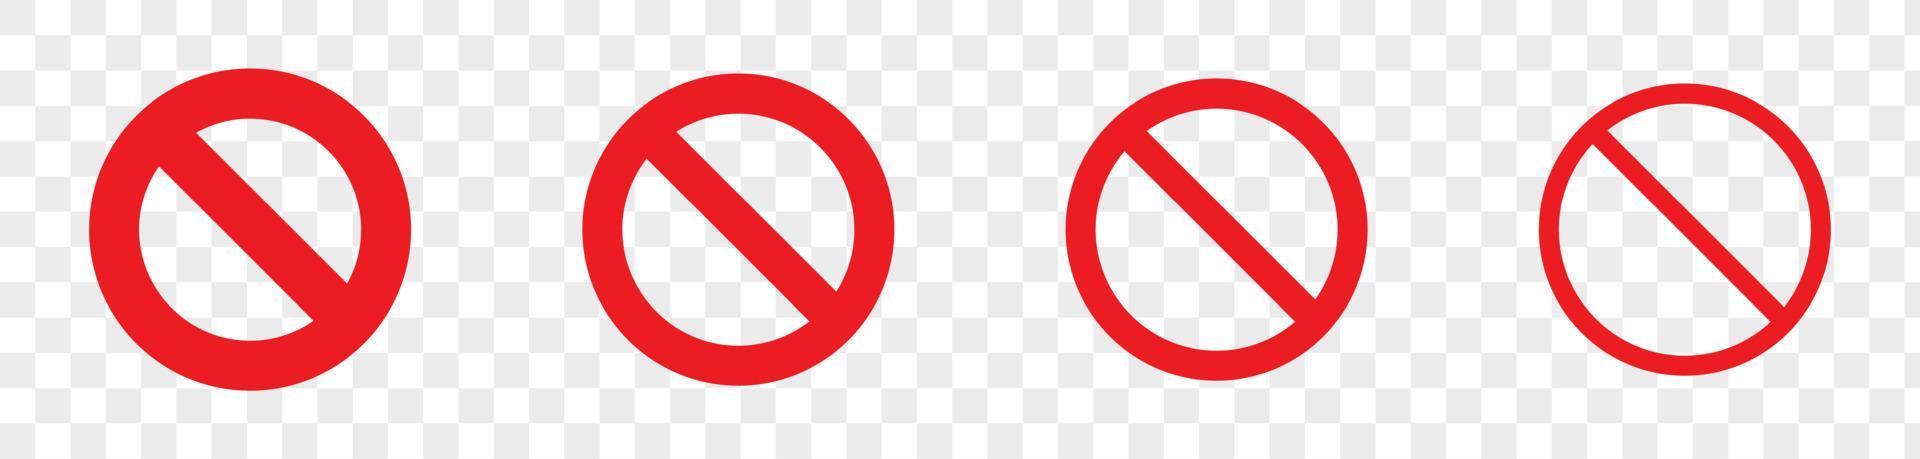 Set of red prohibition sign with no symbol. vector